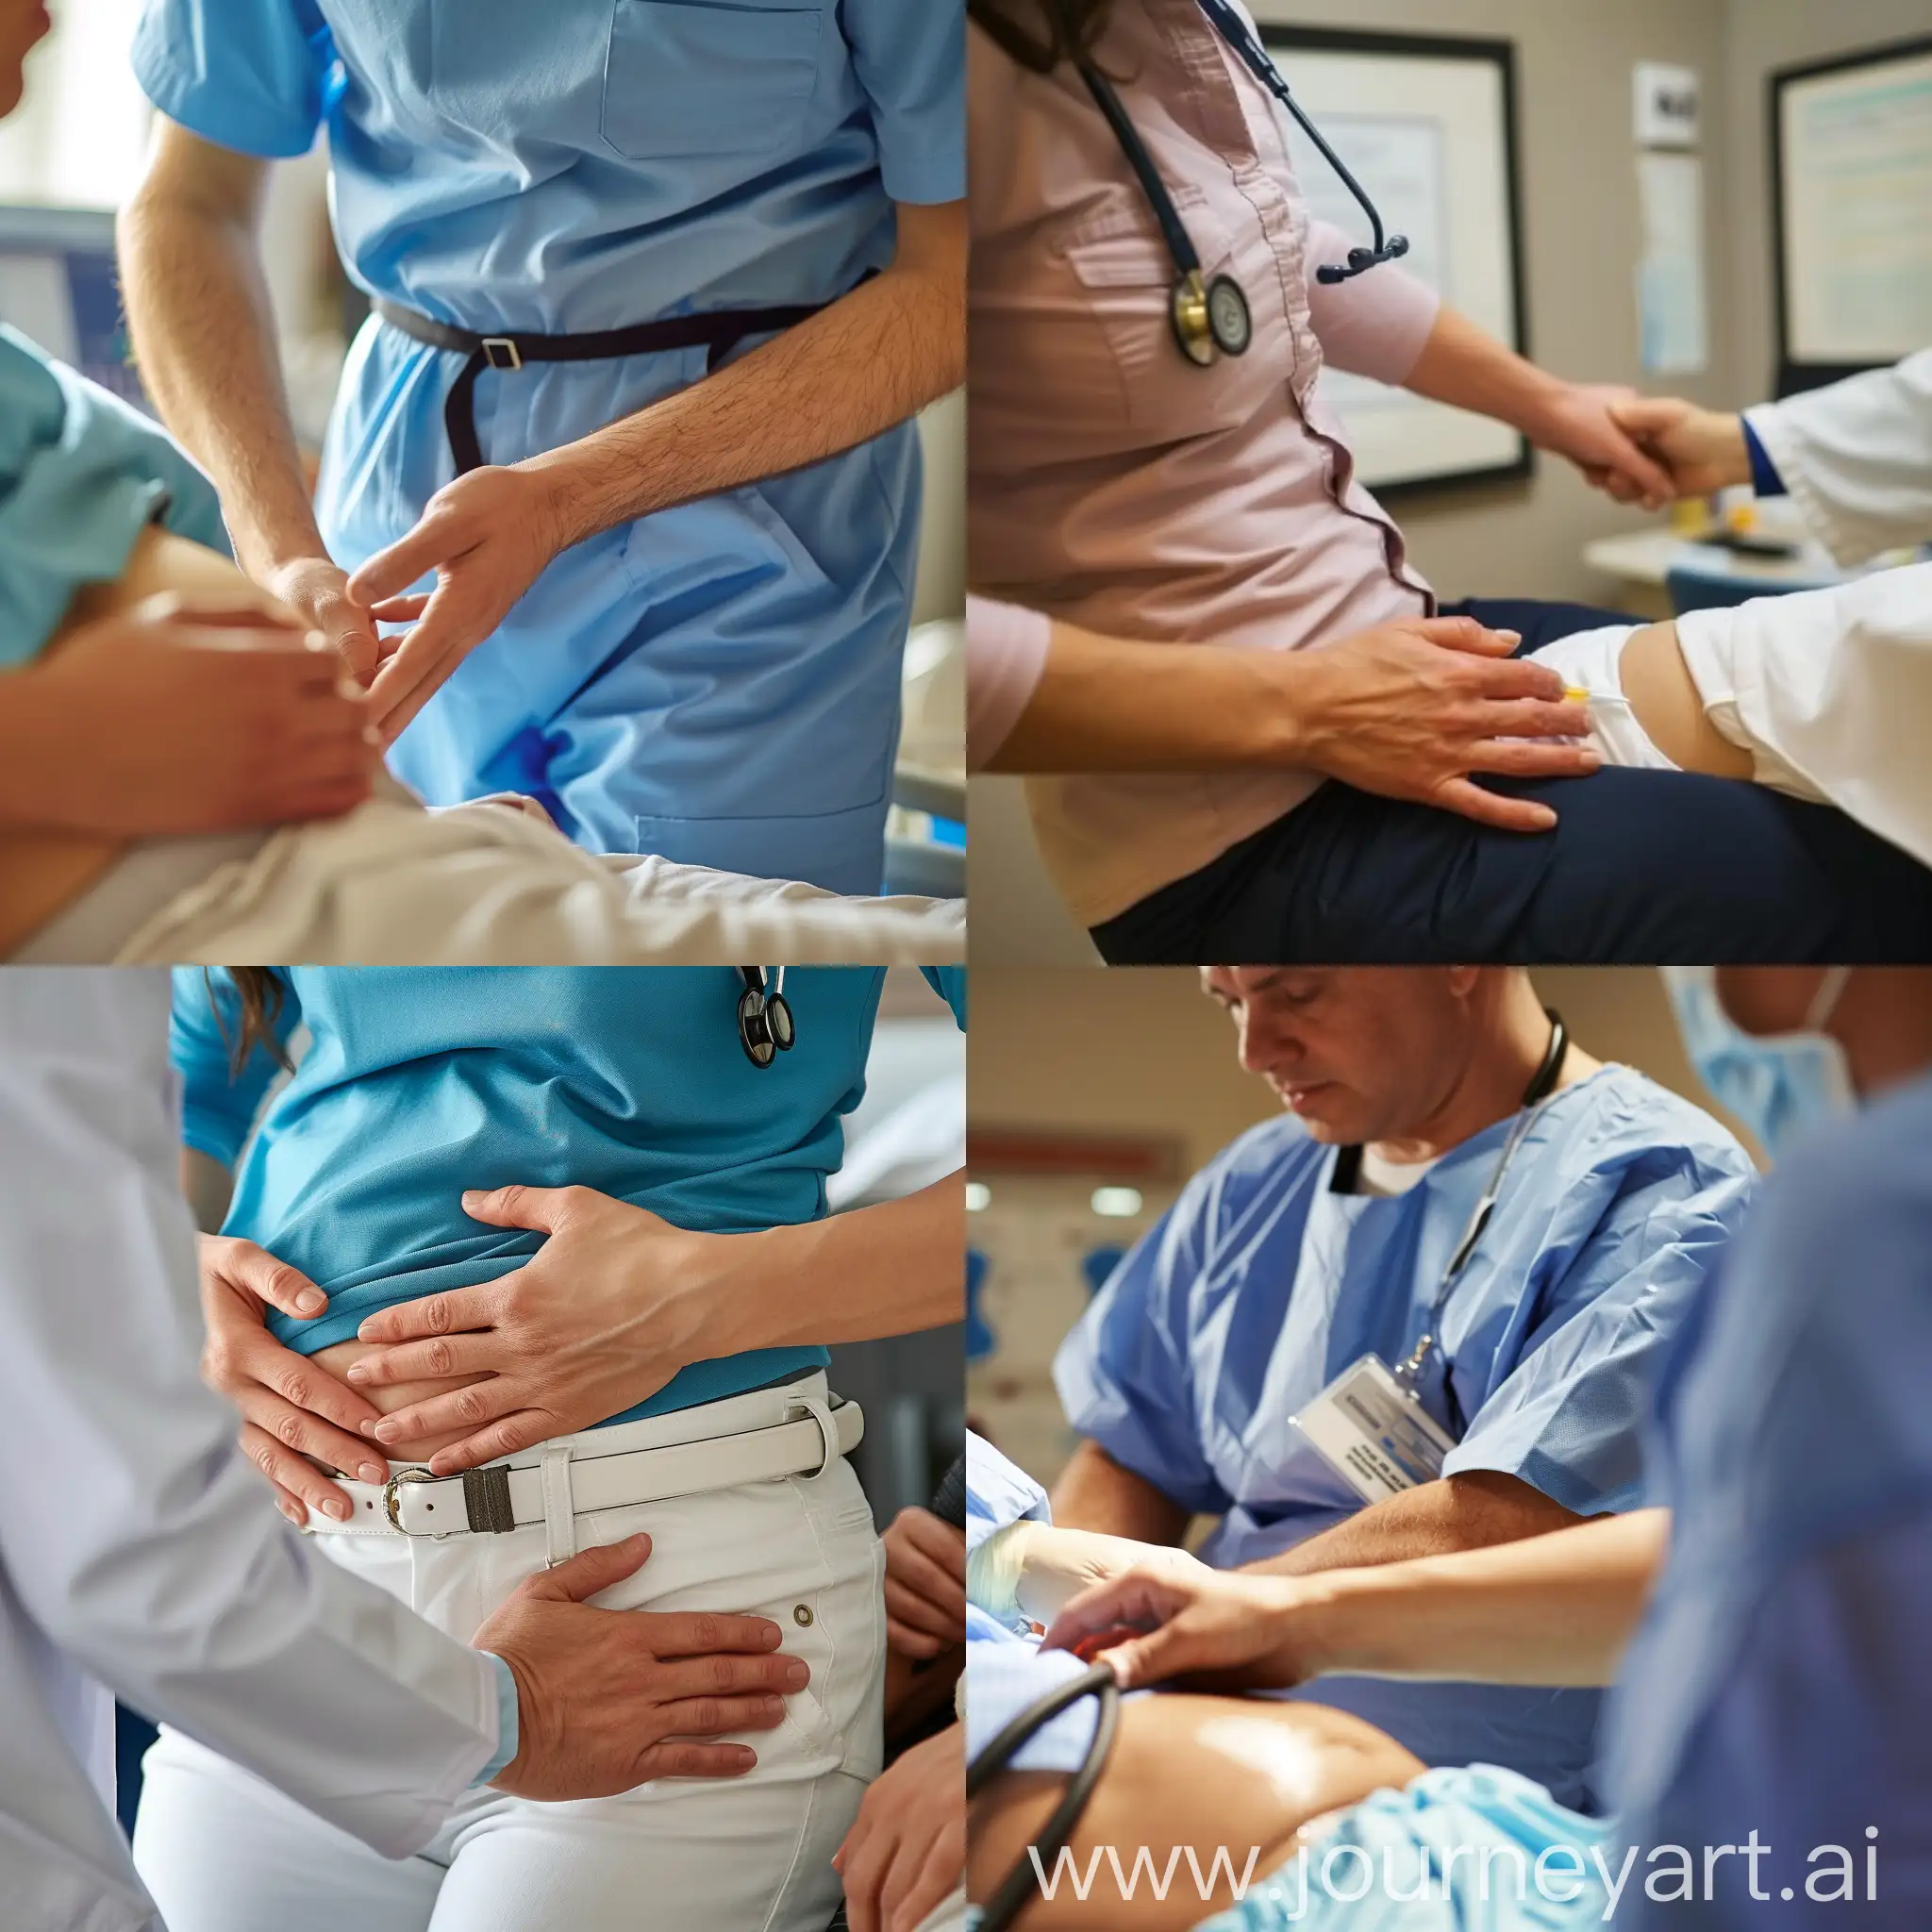 Medical-Examination-Abdominal-Palpation-by-a-Healthcare-Professional